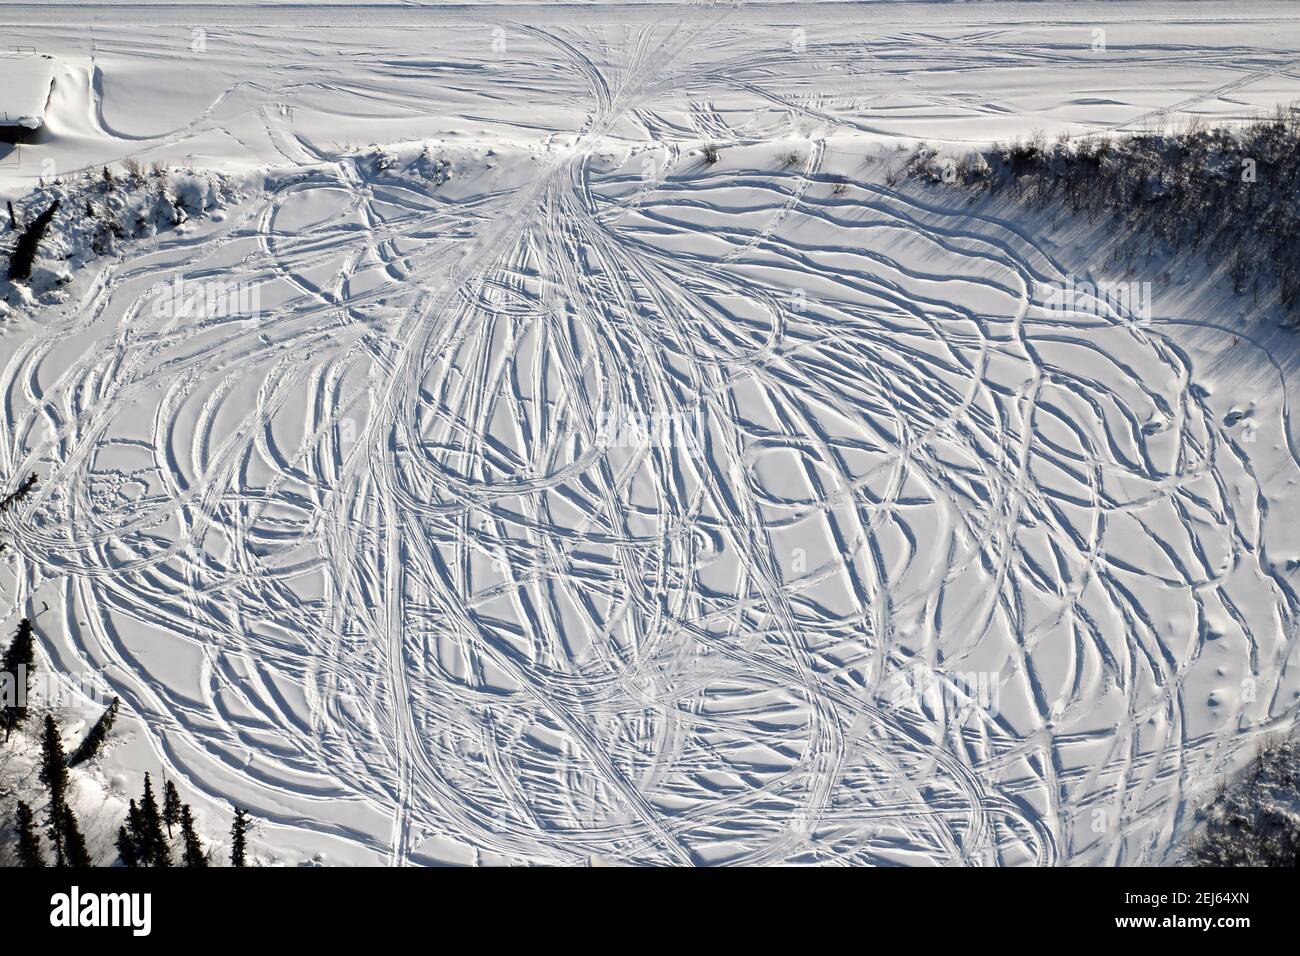 Aerial view of snowmobile tracks in the snow, Inuvik, Northwest Territories, Canada's western Arctic. Stock Photo